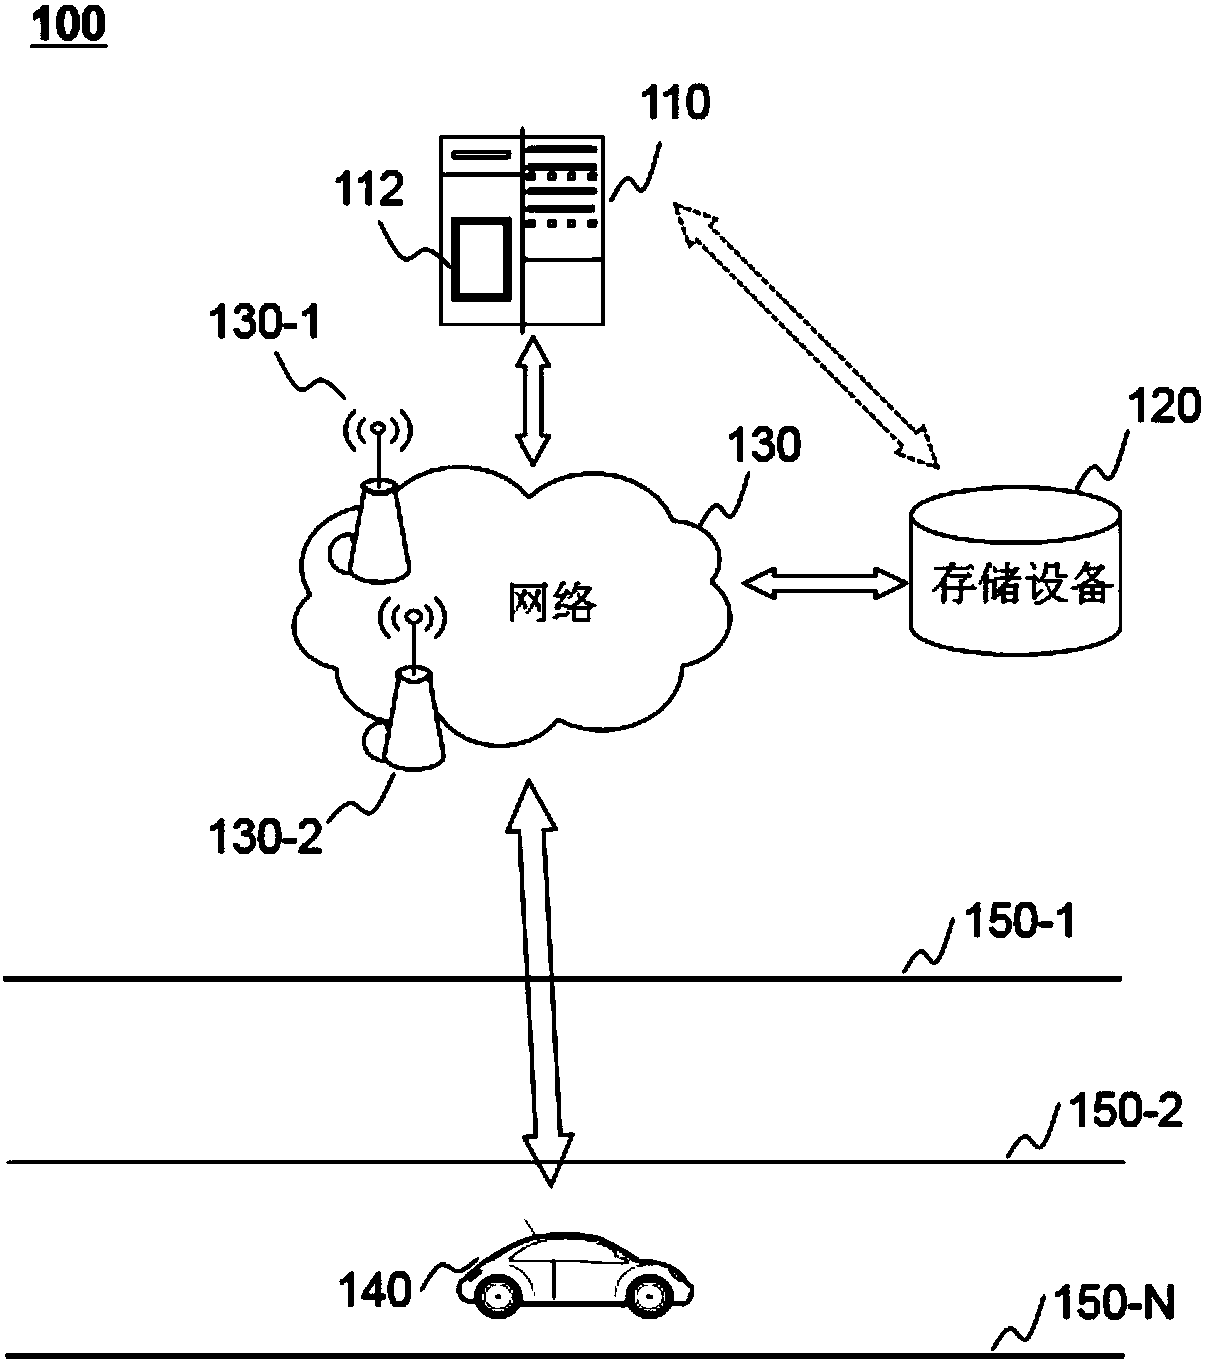 Vehicle, road route detection and driving control method and device